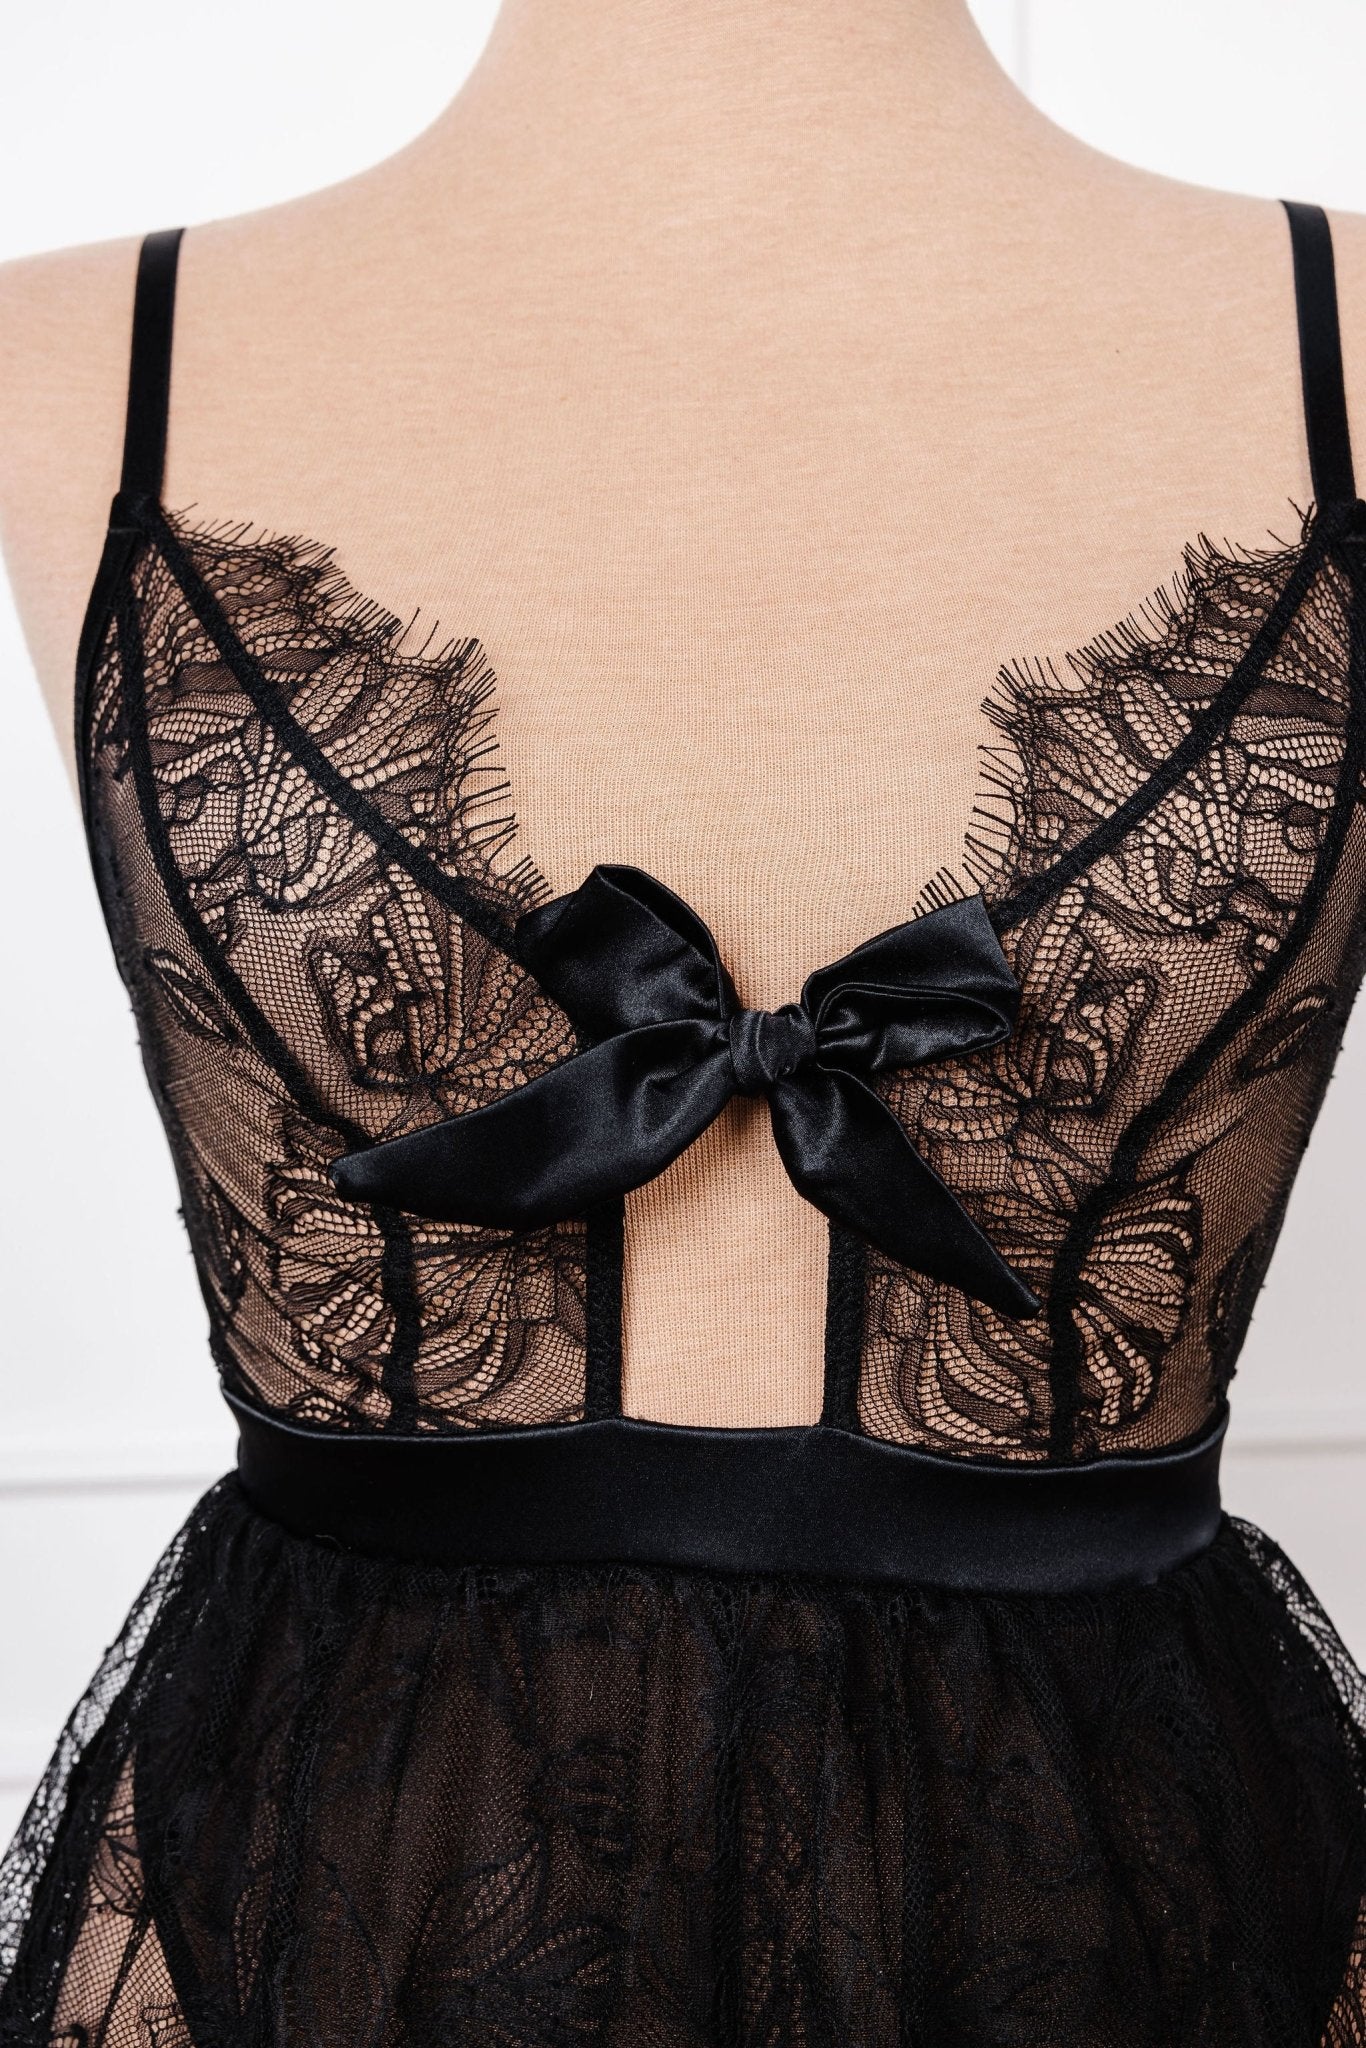 Eyelash Lace Crotchless Teddy - Black - Mentionables